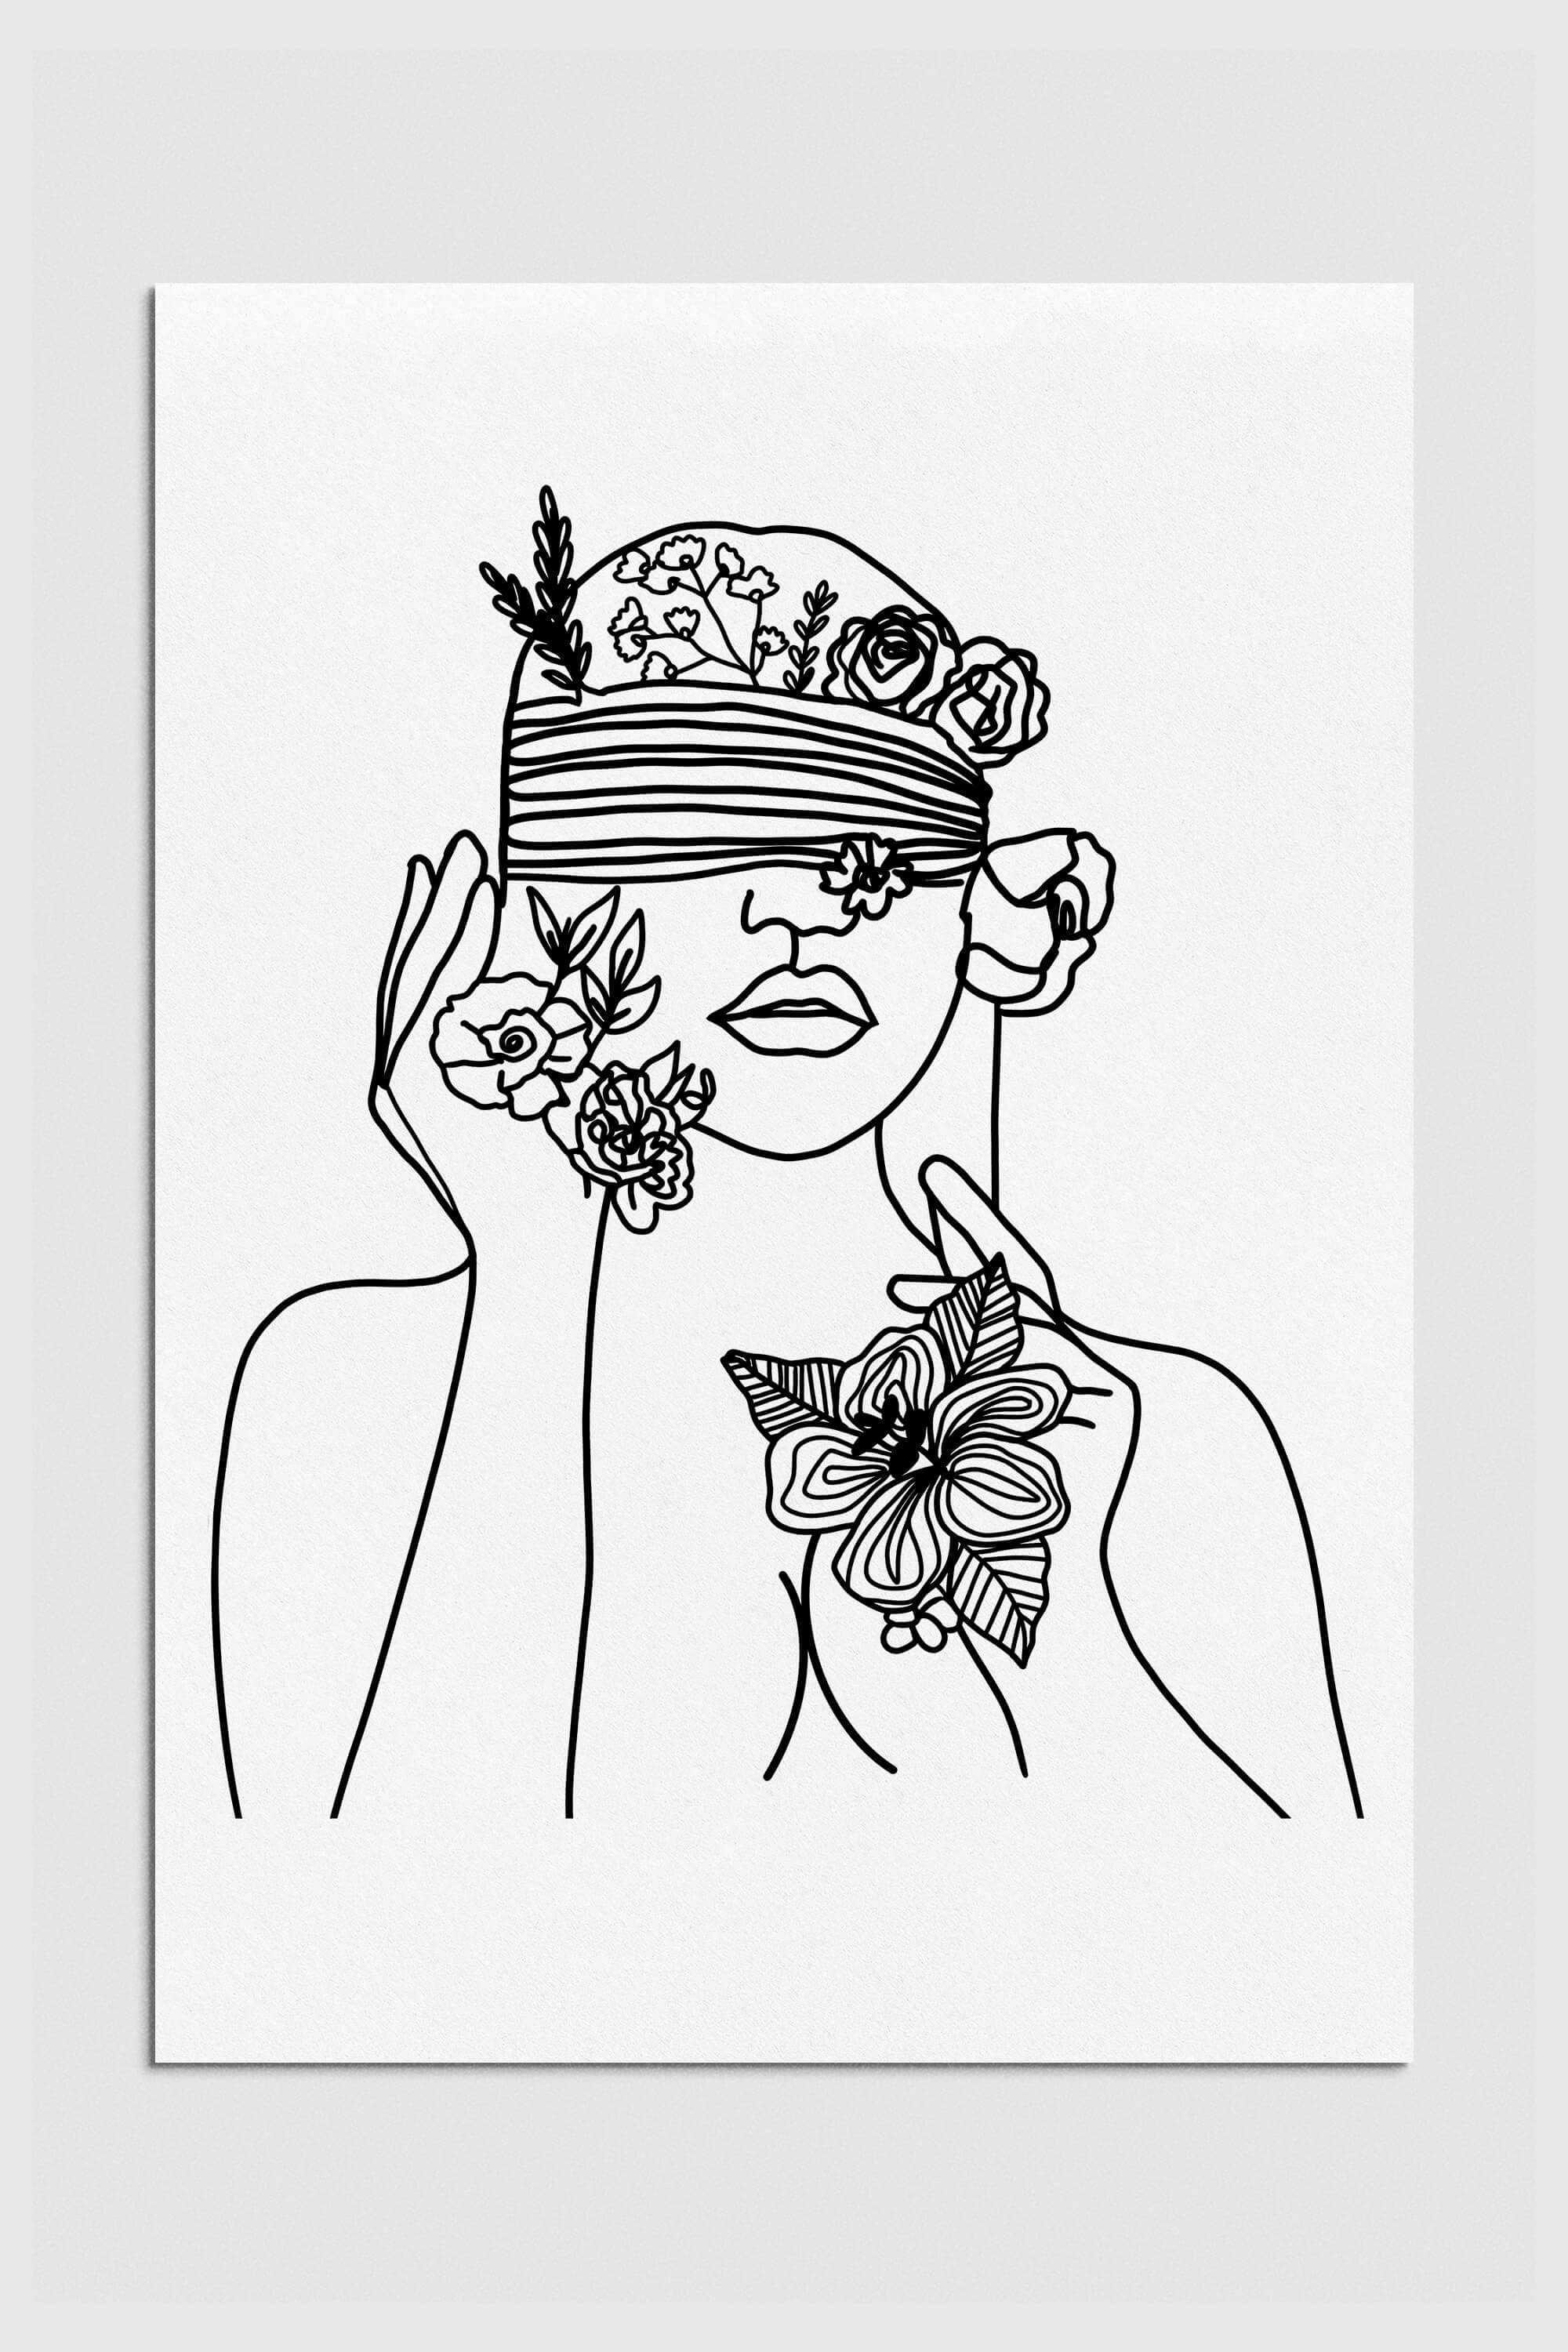 Abstract woman with a floral face in elegant line art style. Monochromatic beauty with intricate floral details. Perfect wall decor for a modern, sophisticated ambiance.